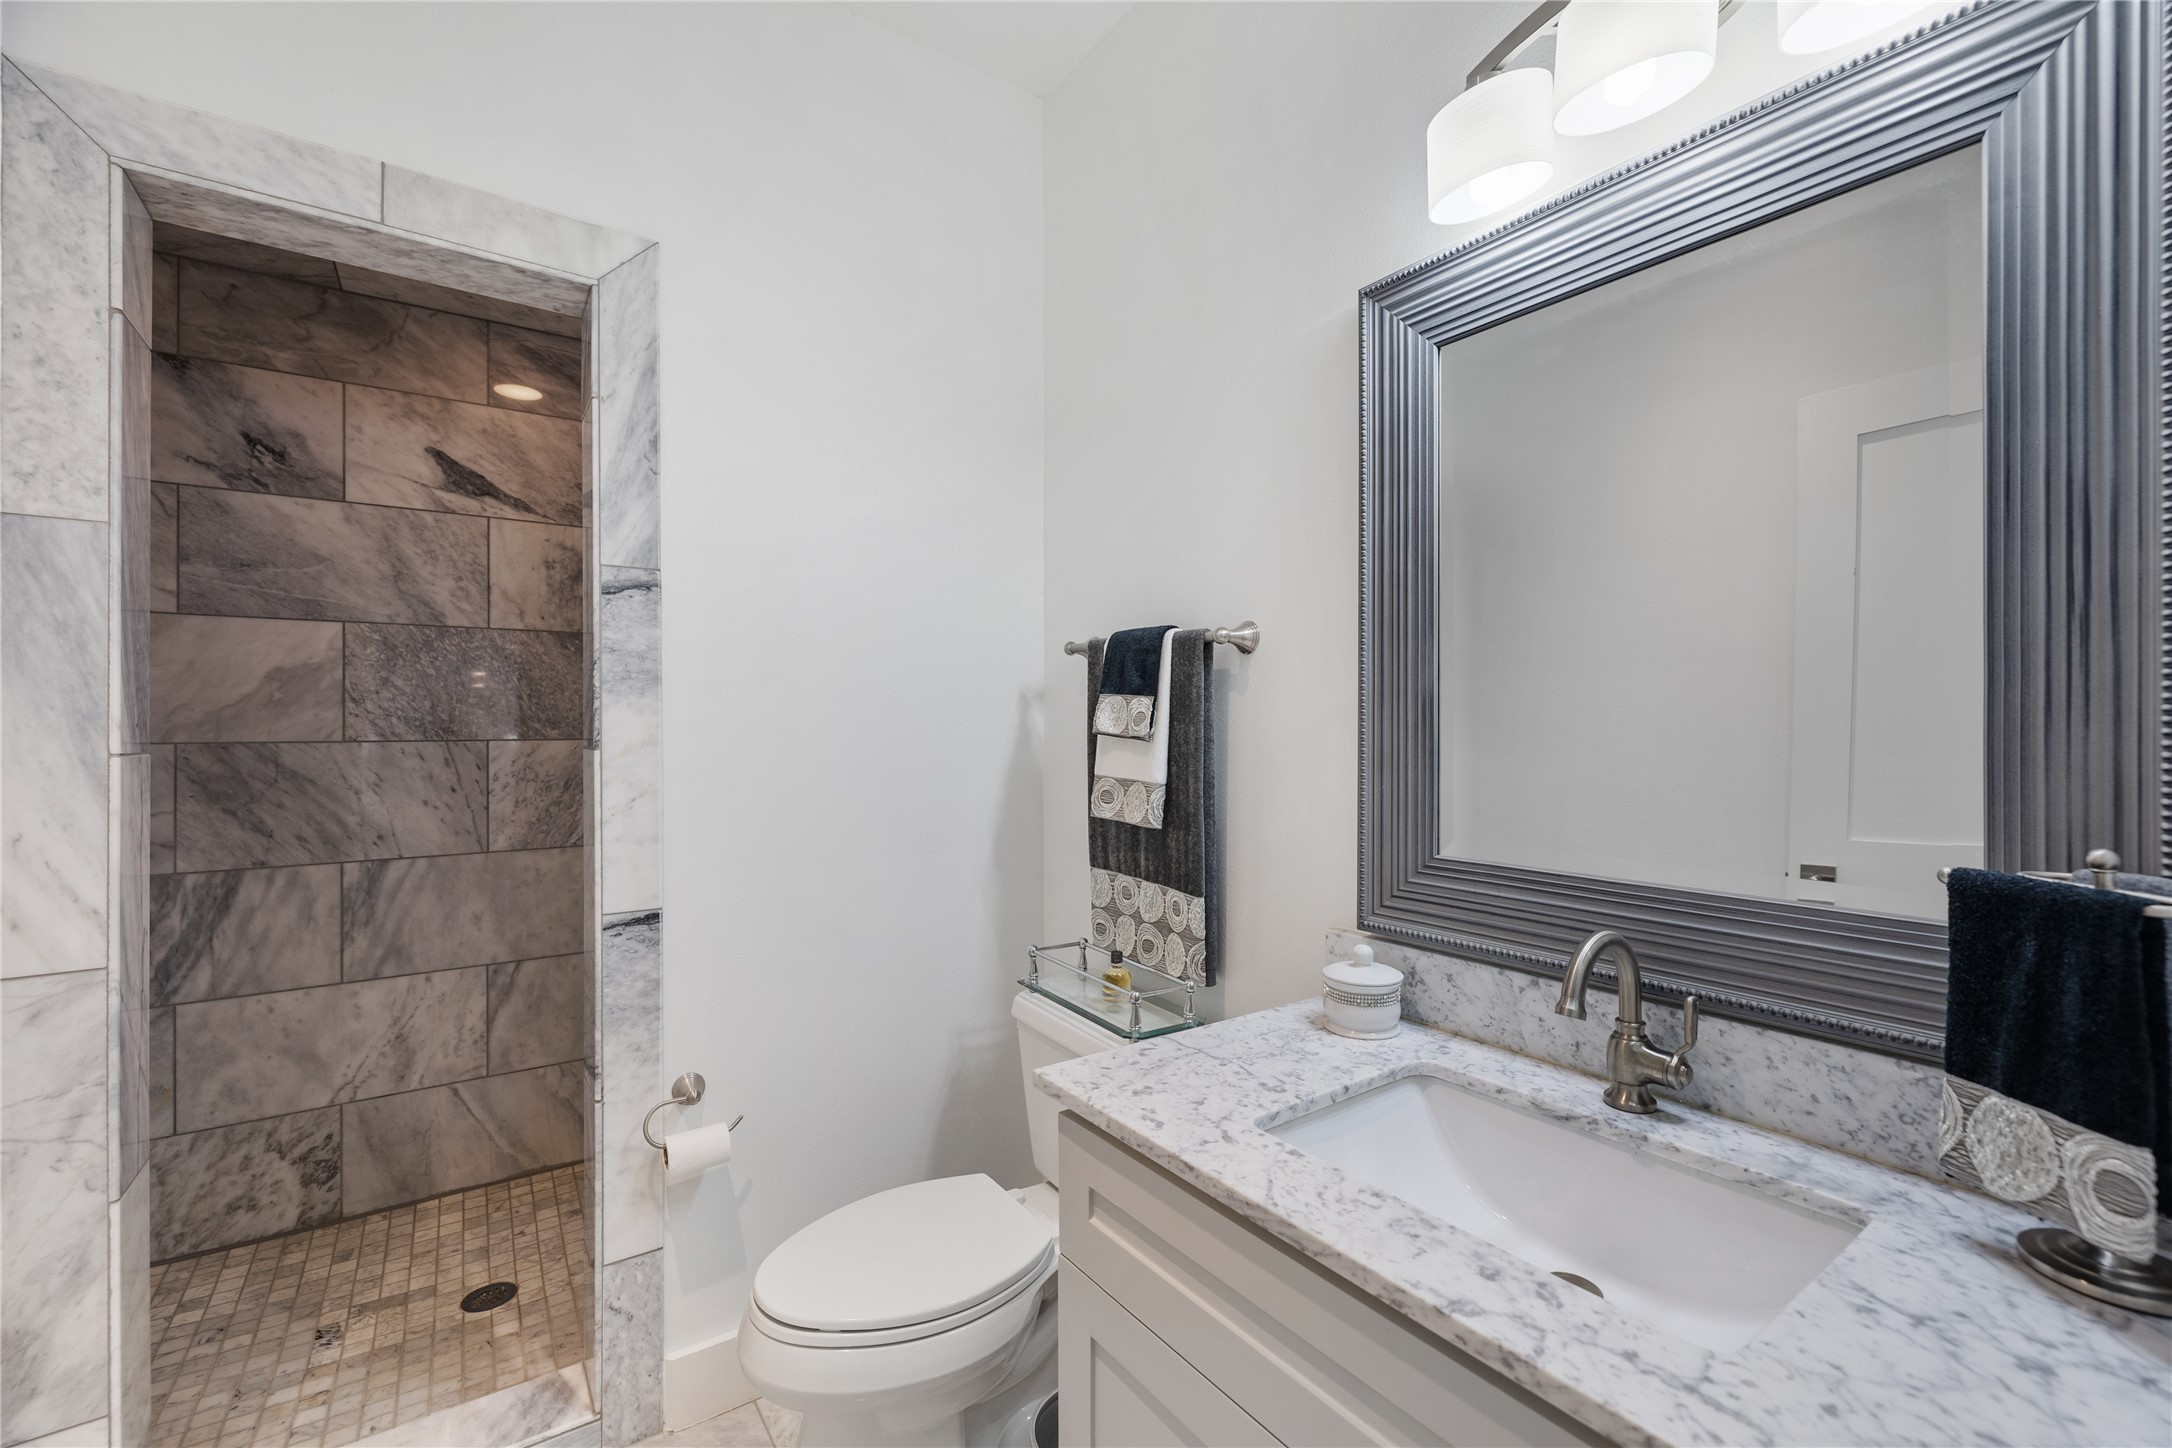 You will love this luxury bathroom, located next to the second bedroom. Fitted with luxury finishes such as the large walk-in shower and marble tile work throughout.